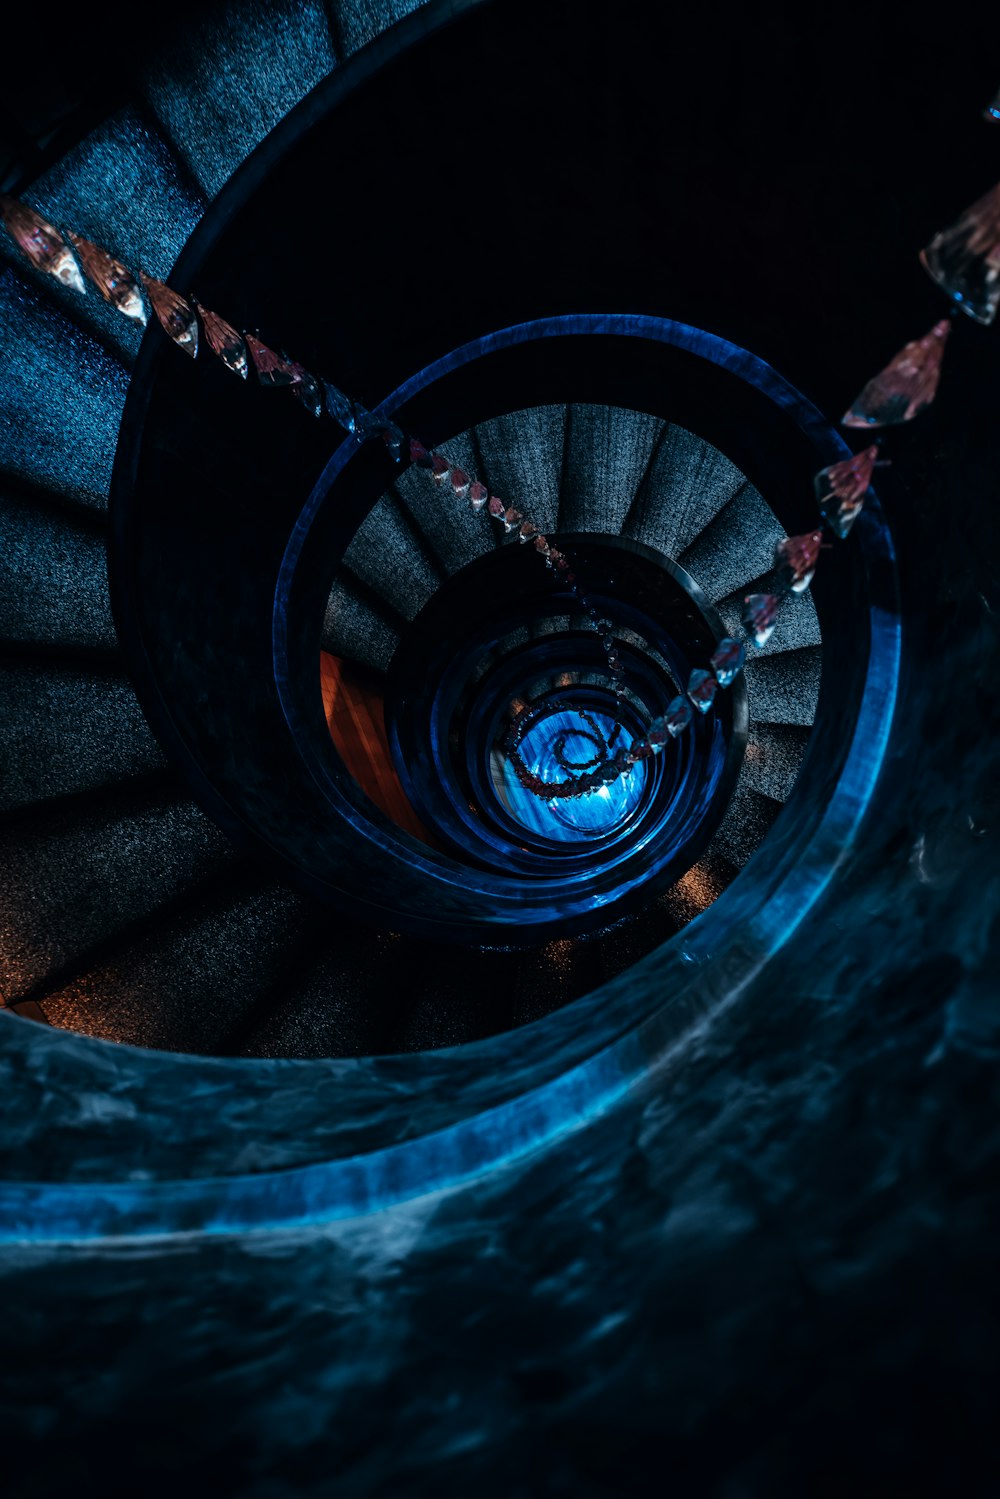 a spiral staircase in a building lit up at night